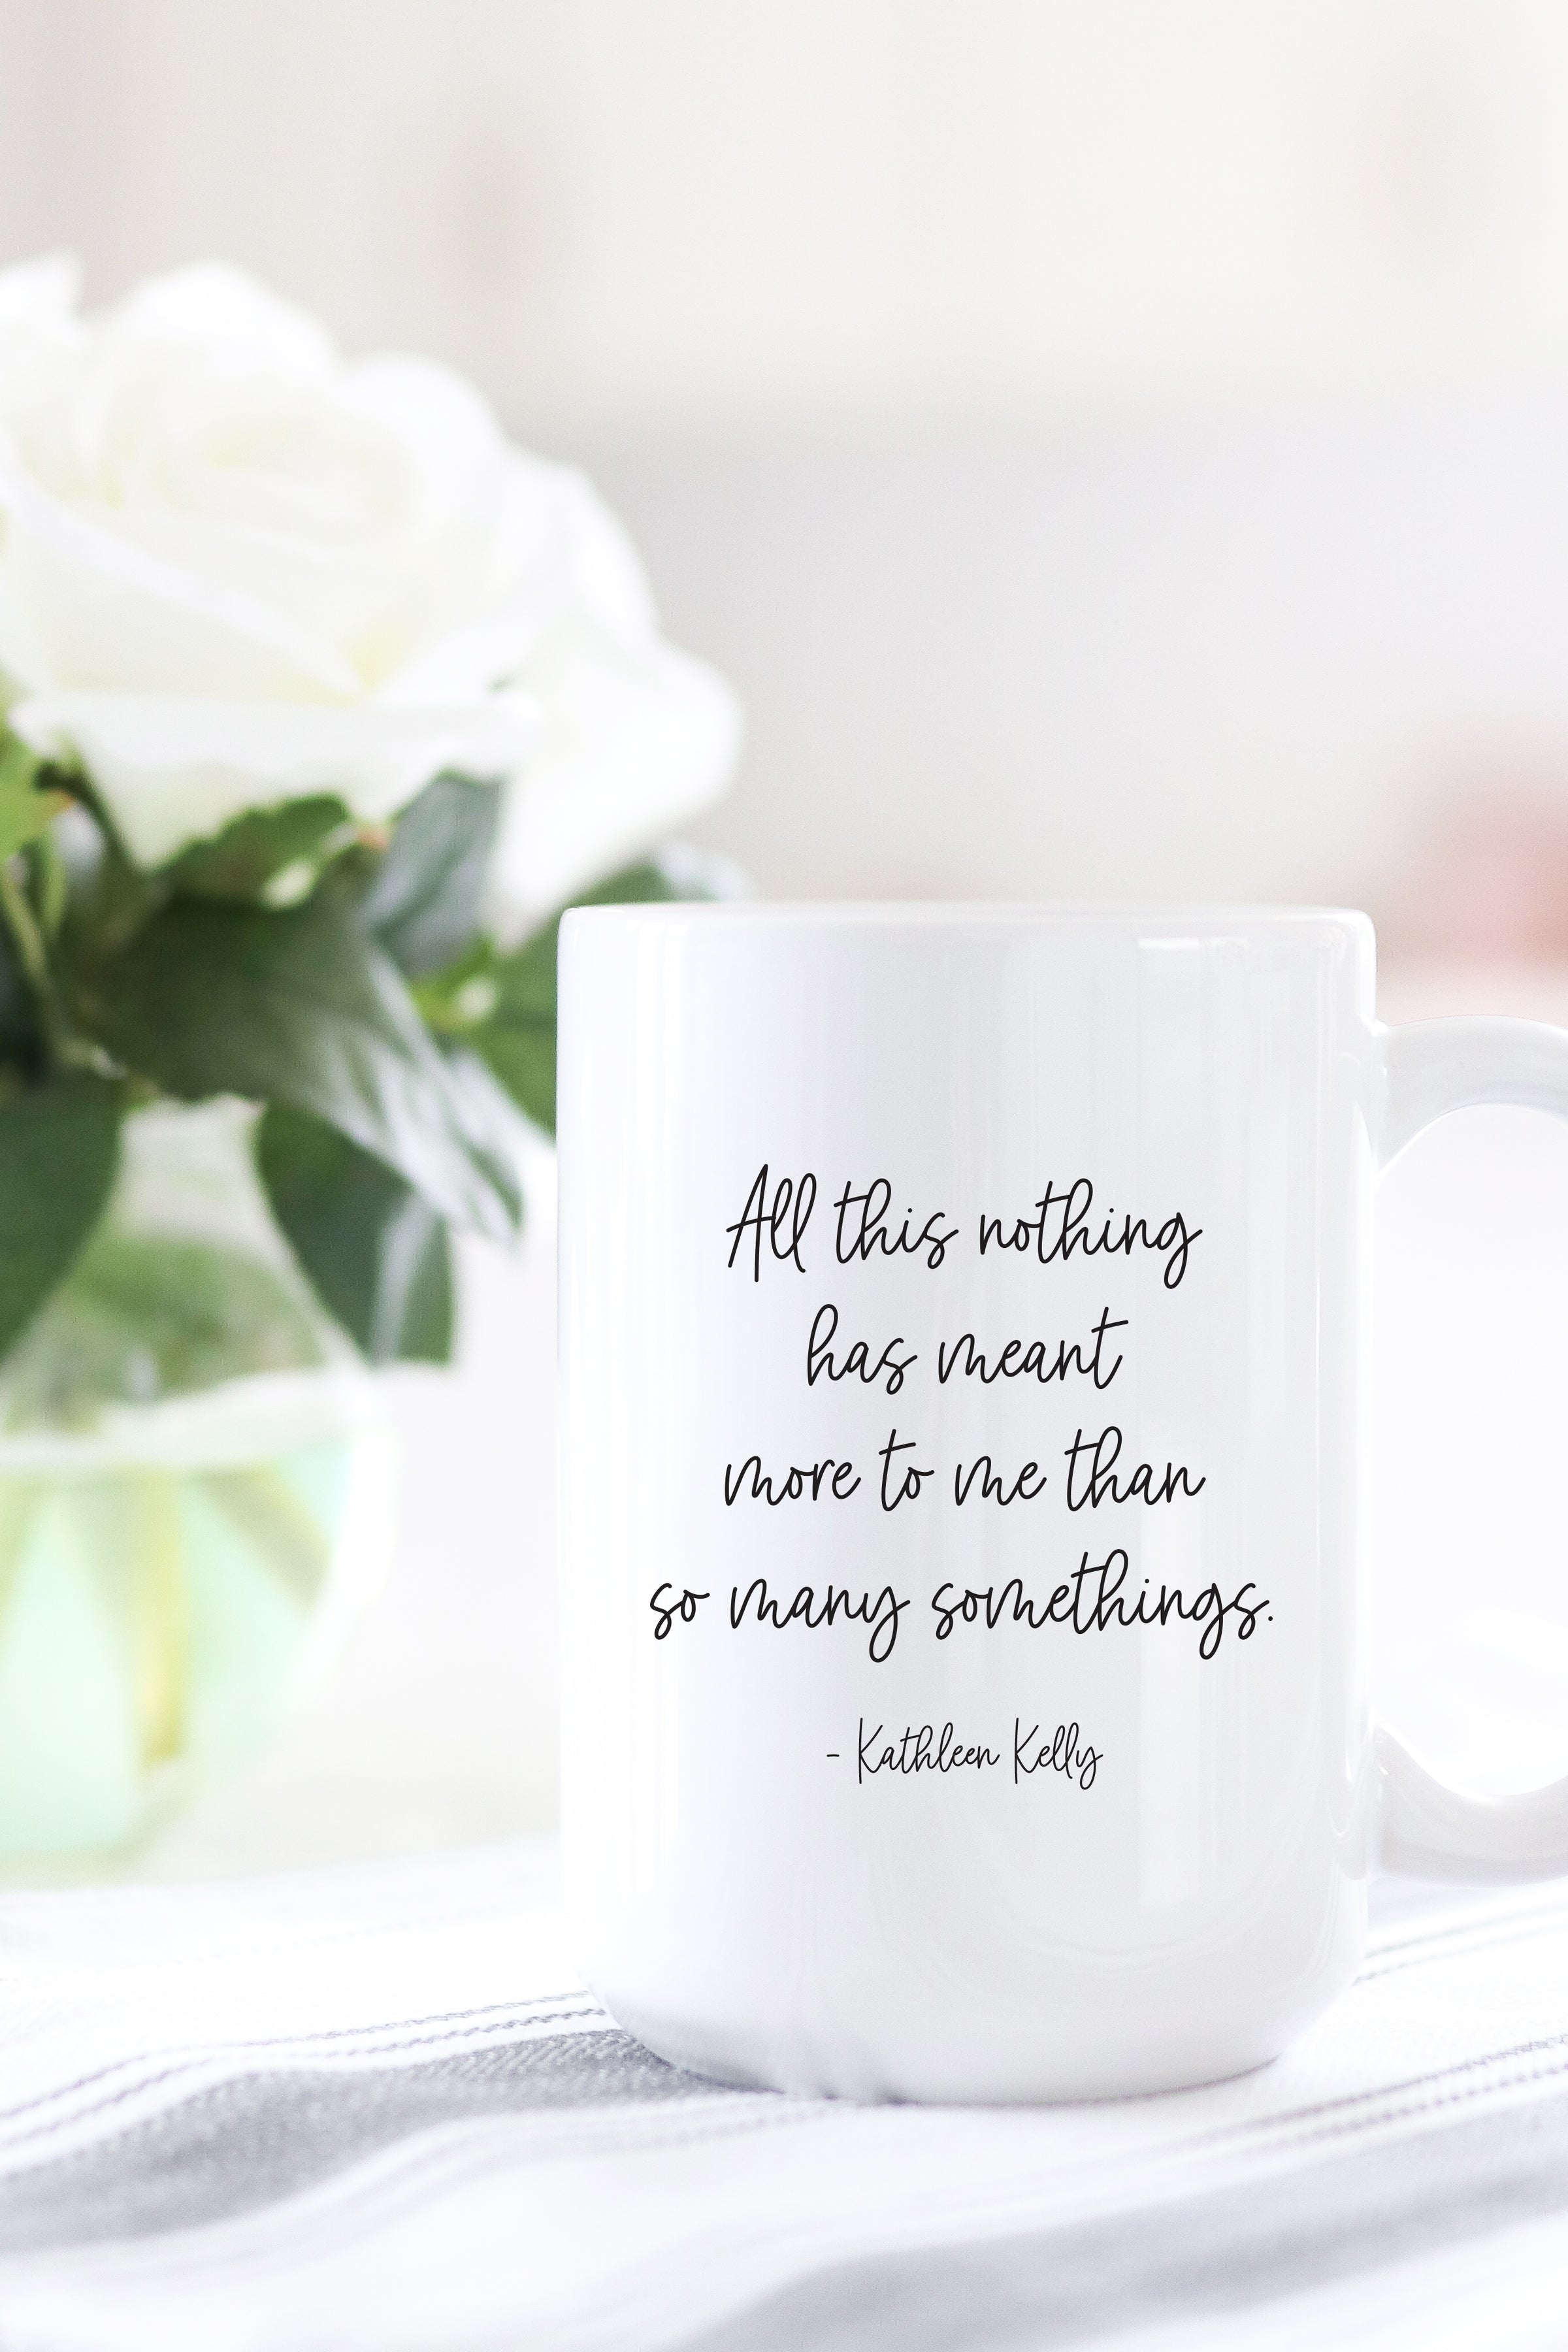 "All this nothing has meant more to me than so many somethings." - Kathleen Kelly You've Got Mail mug